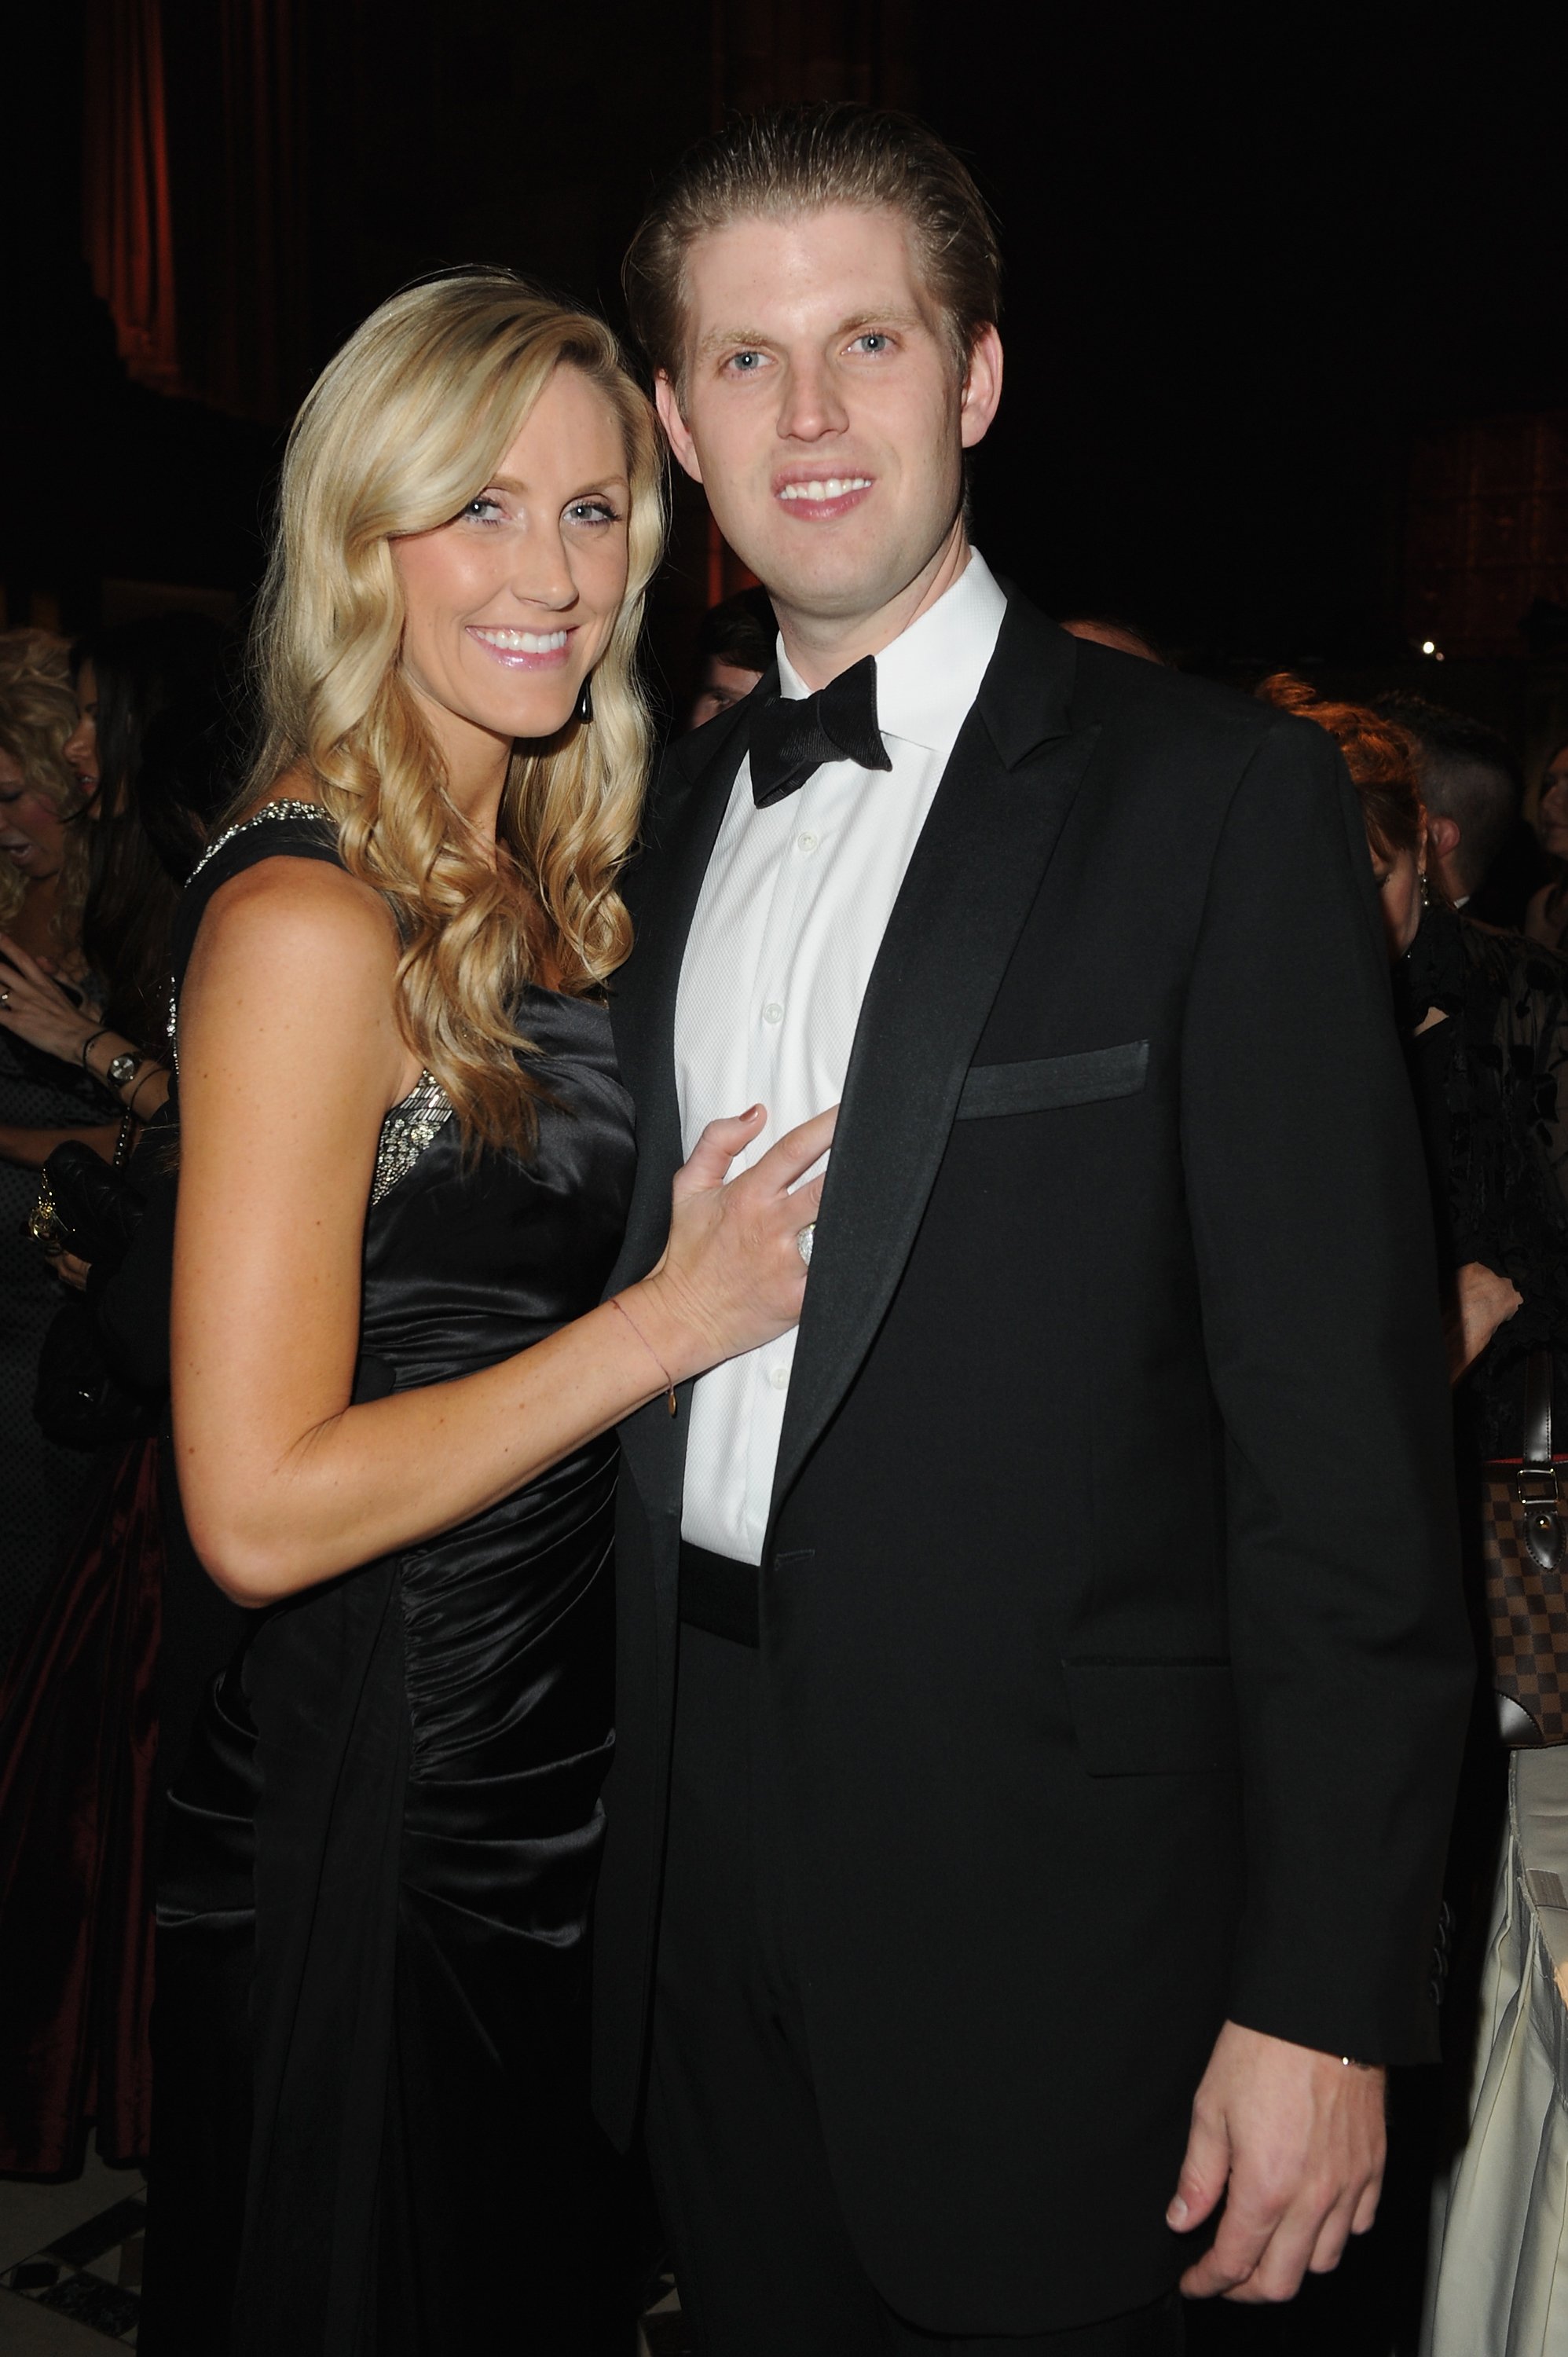 Lara Yunaska and Eric Trump attend European School Of Economics Foundation Vision And Reality Awards on December 5, 2012 in New York City | Photo: GettyImages